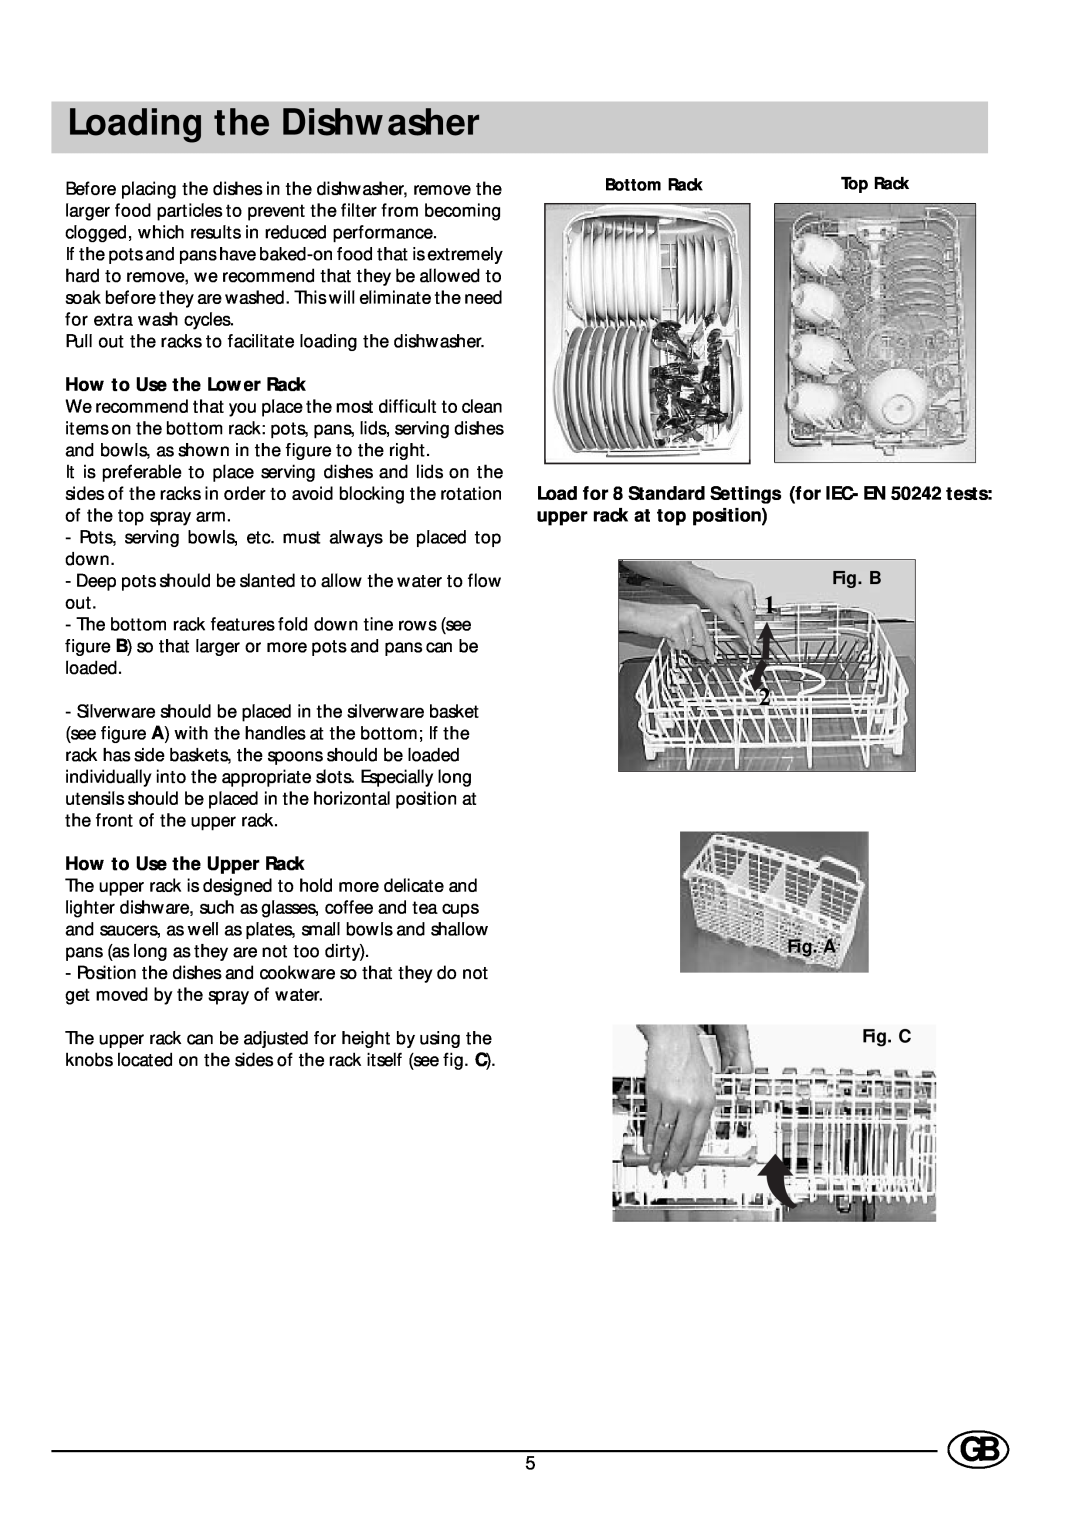 Ariston AS100 manual Loading the Dishwasher, How to Use the Lower Rack, How to Use the Upper Rack, Fig. B, Fig. A Fig. C 